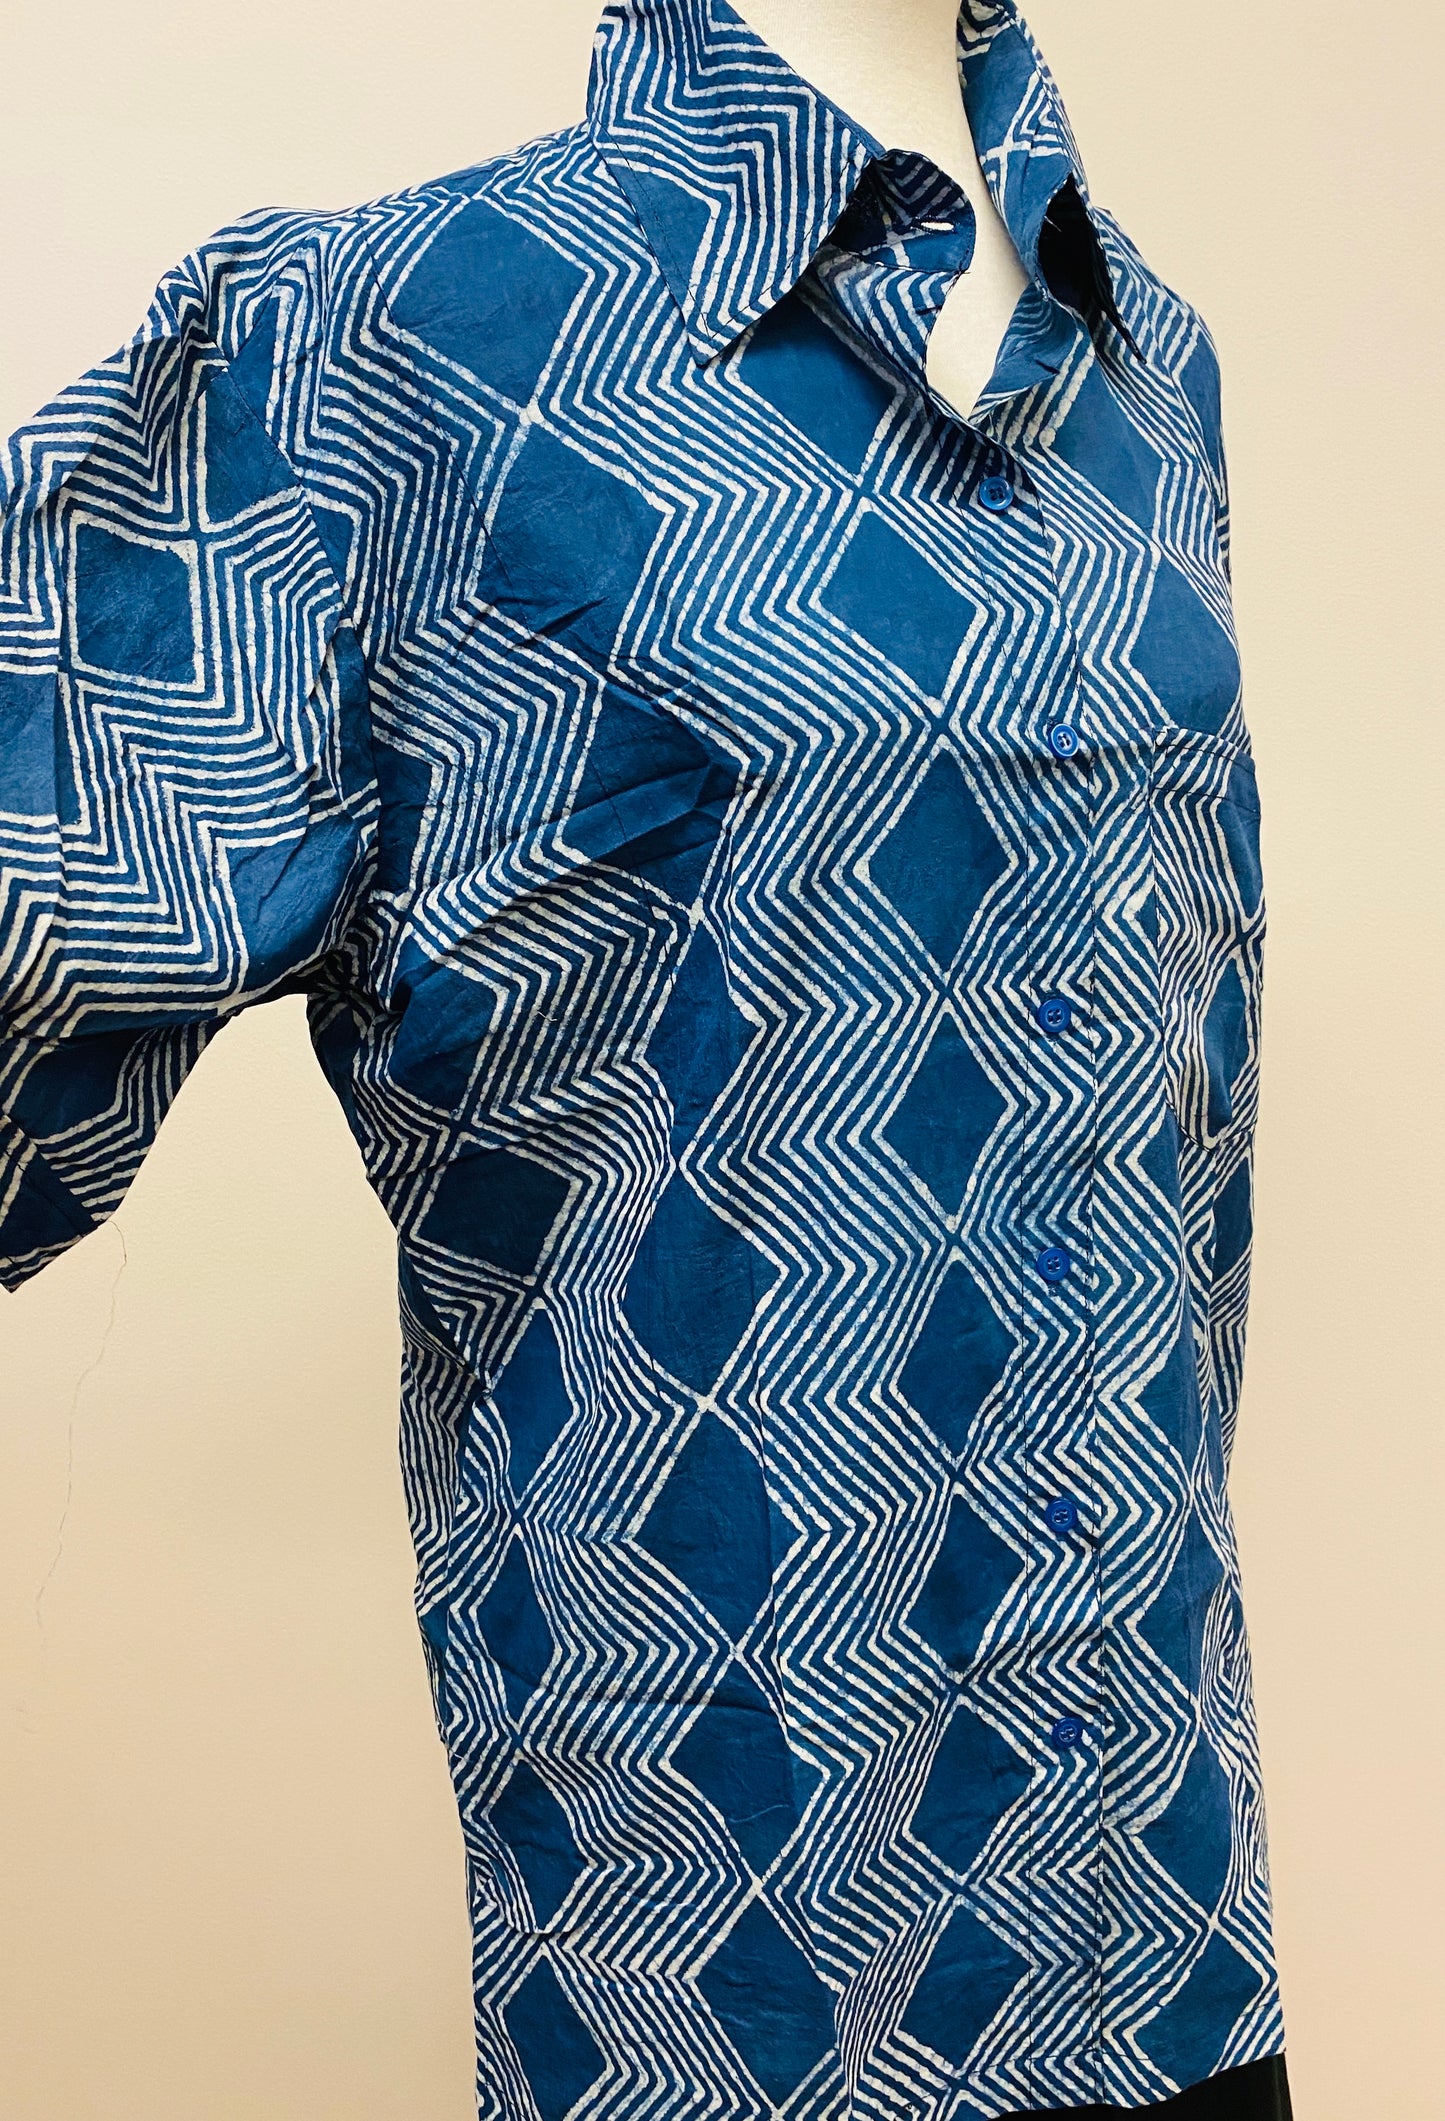 Hand Block Print Cotton Mens Button Up Shirt - 4 Patterns Available